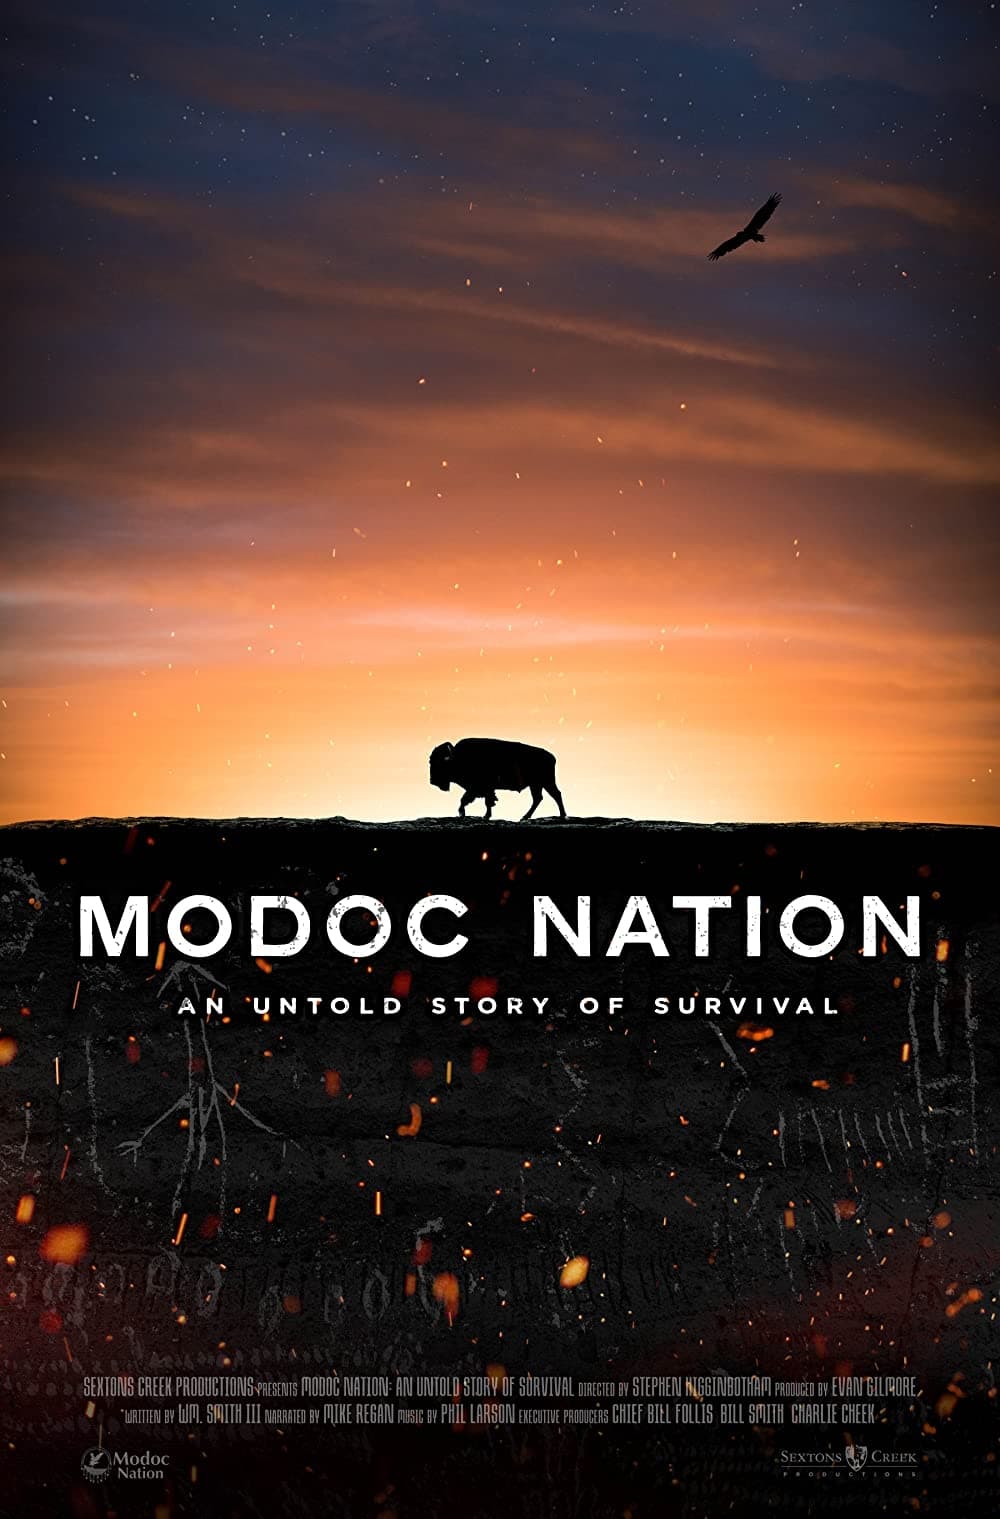 Modoc Nation: An Untold Story of Survival